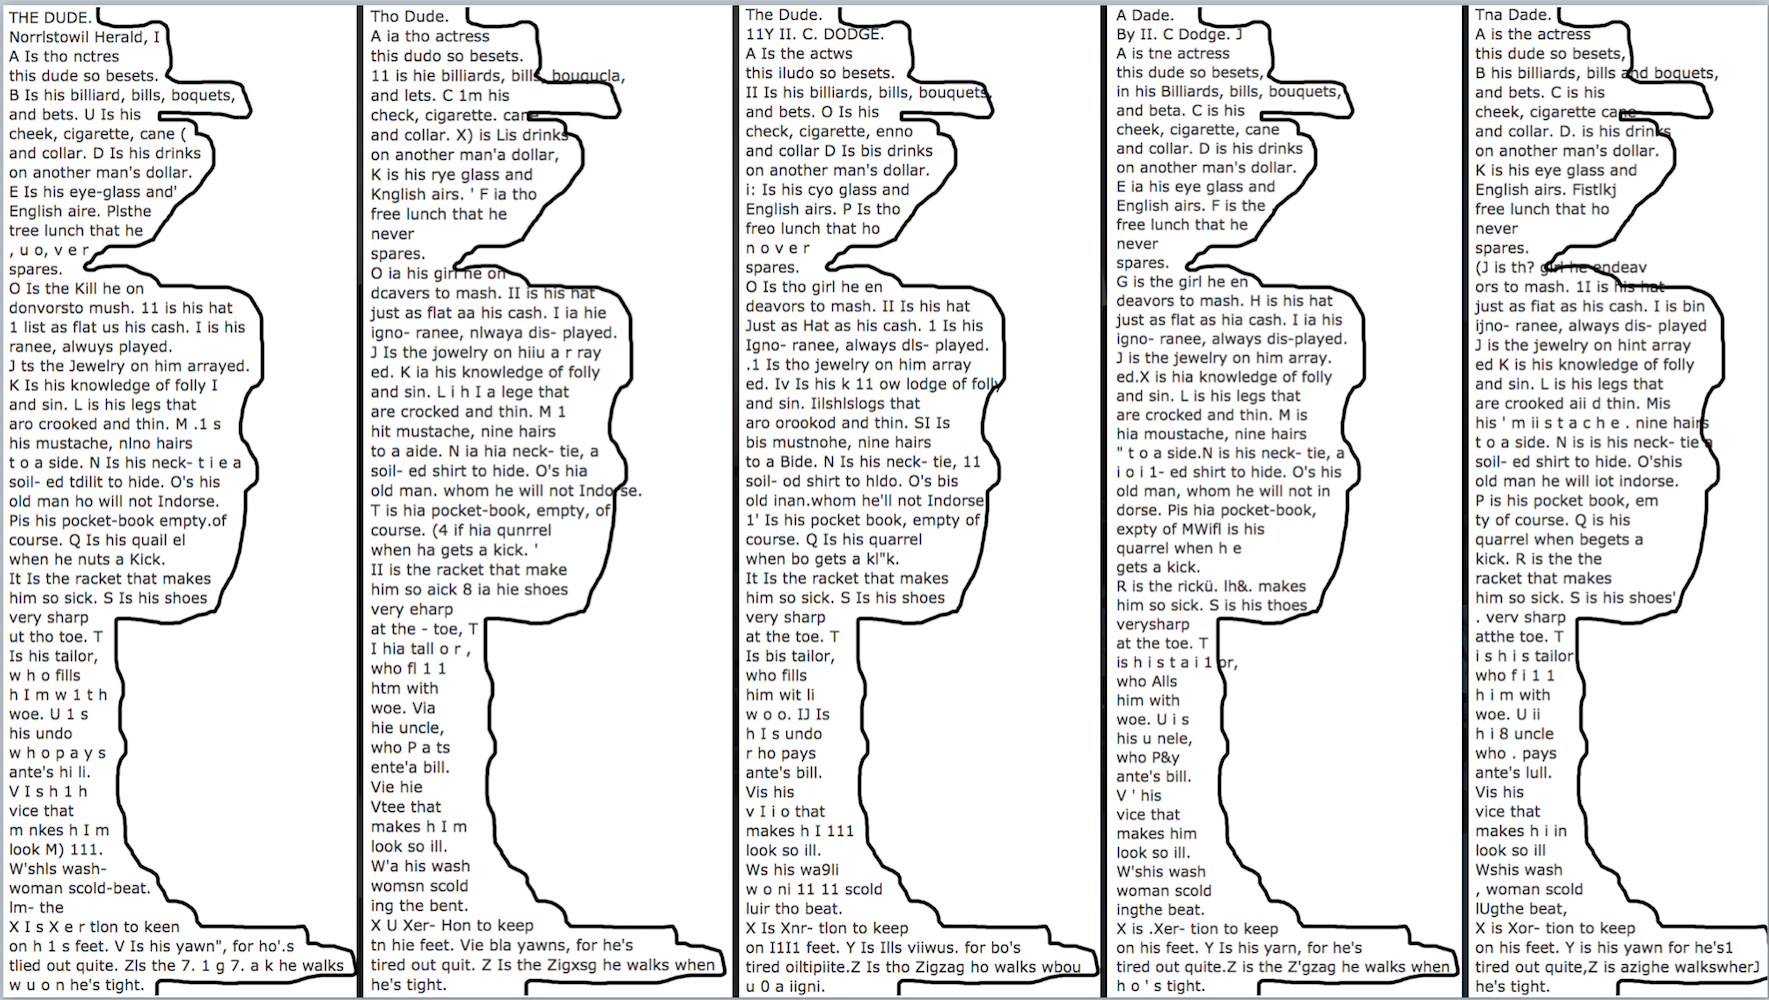 A tracing of the outline of the OCR for several editions of the Dude.